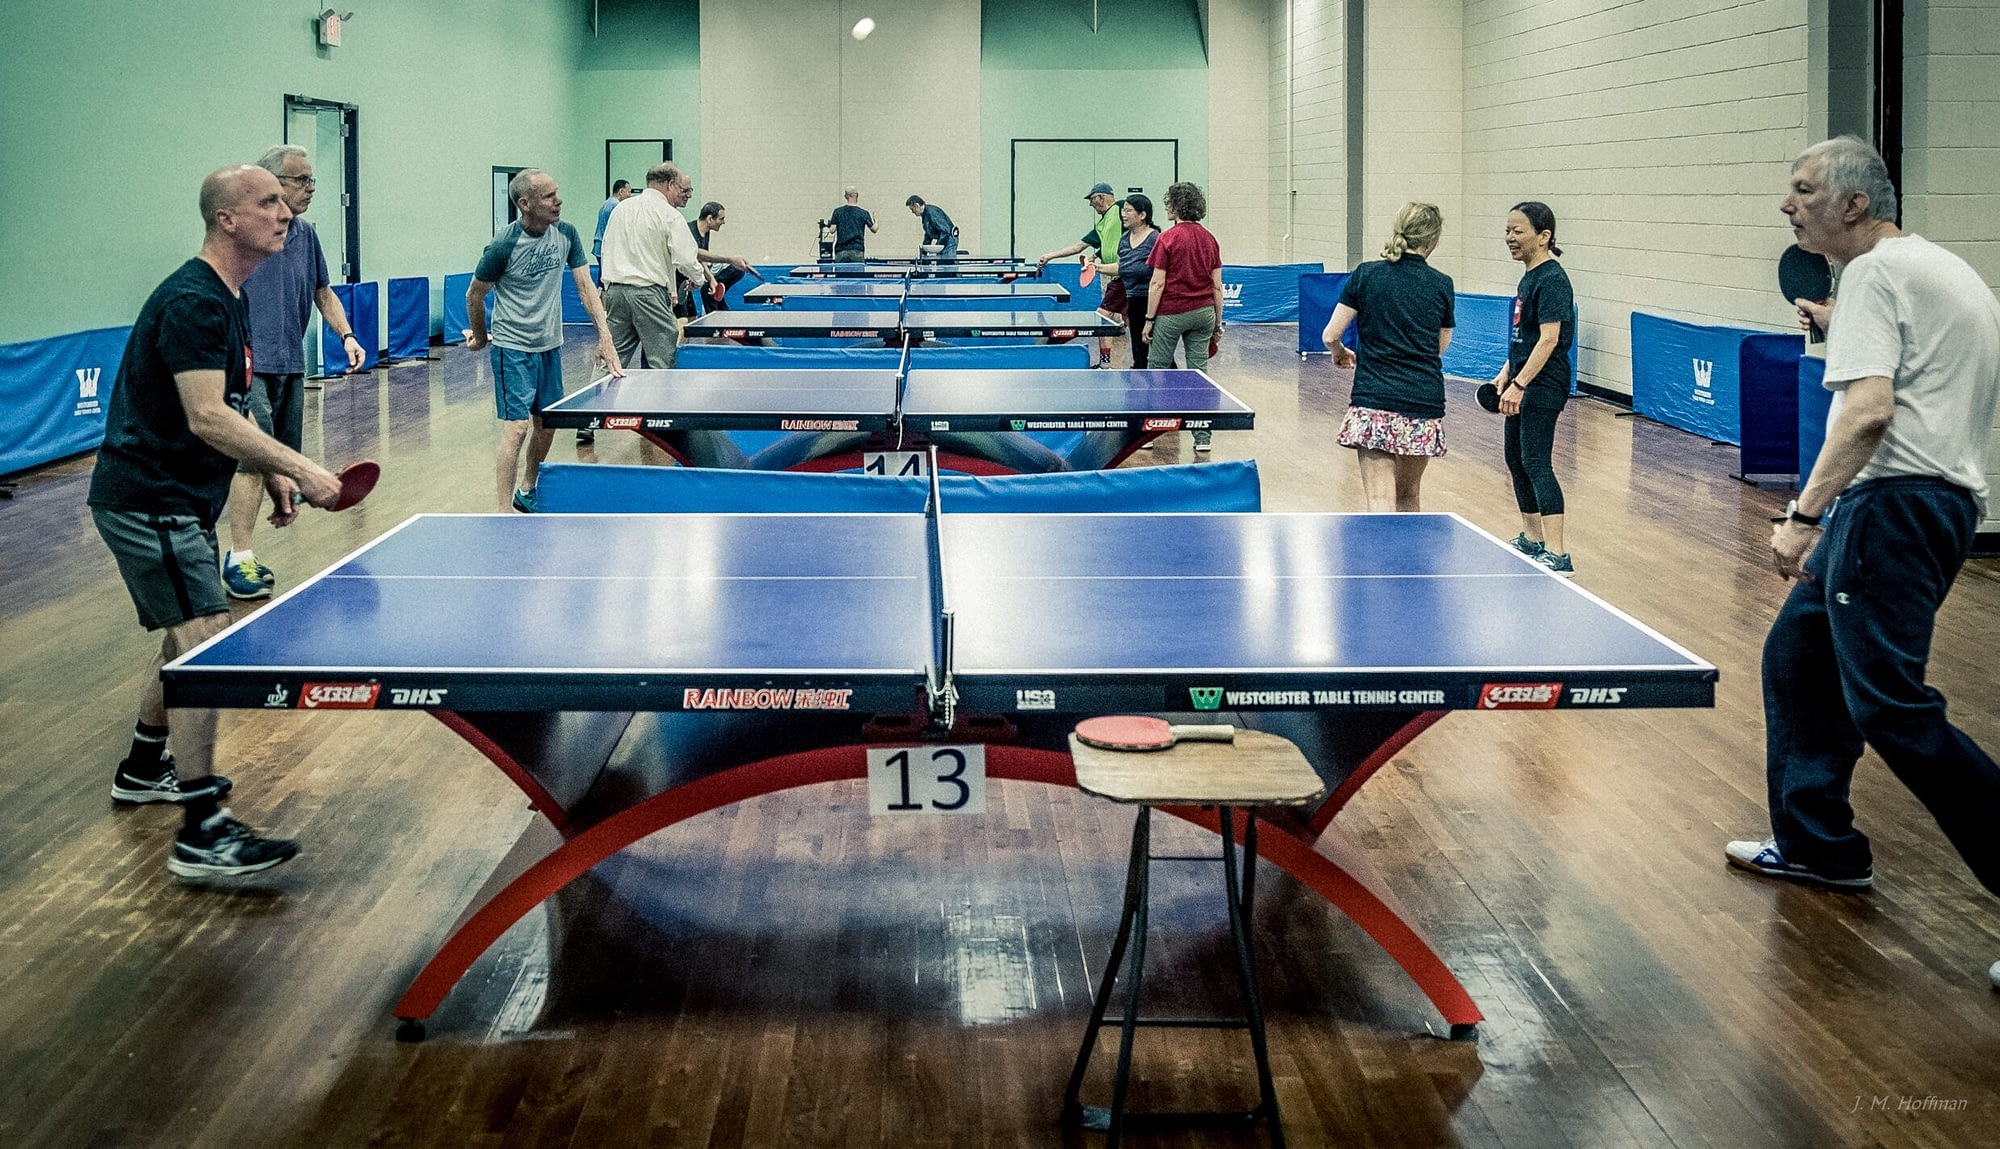 Image: seniors playing ping pong for Parkinson's